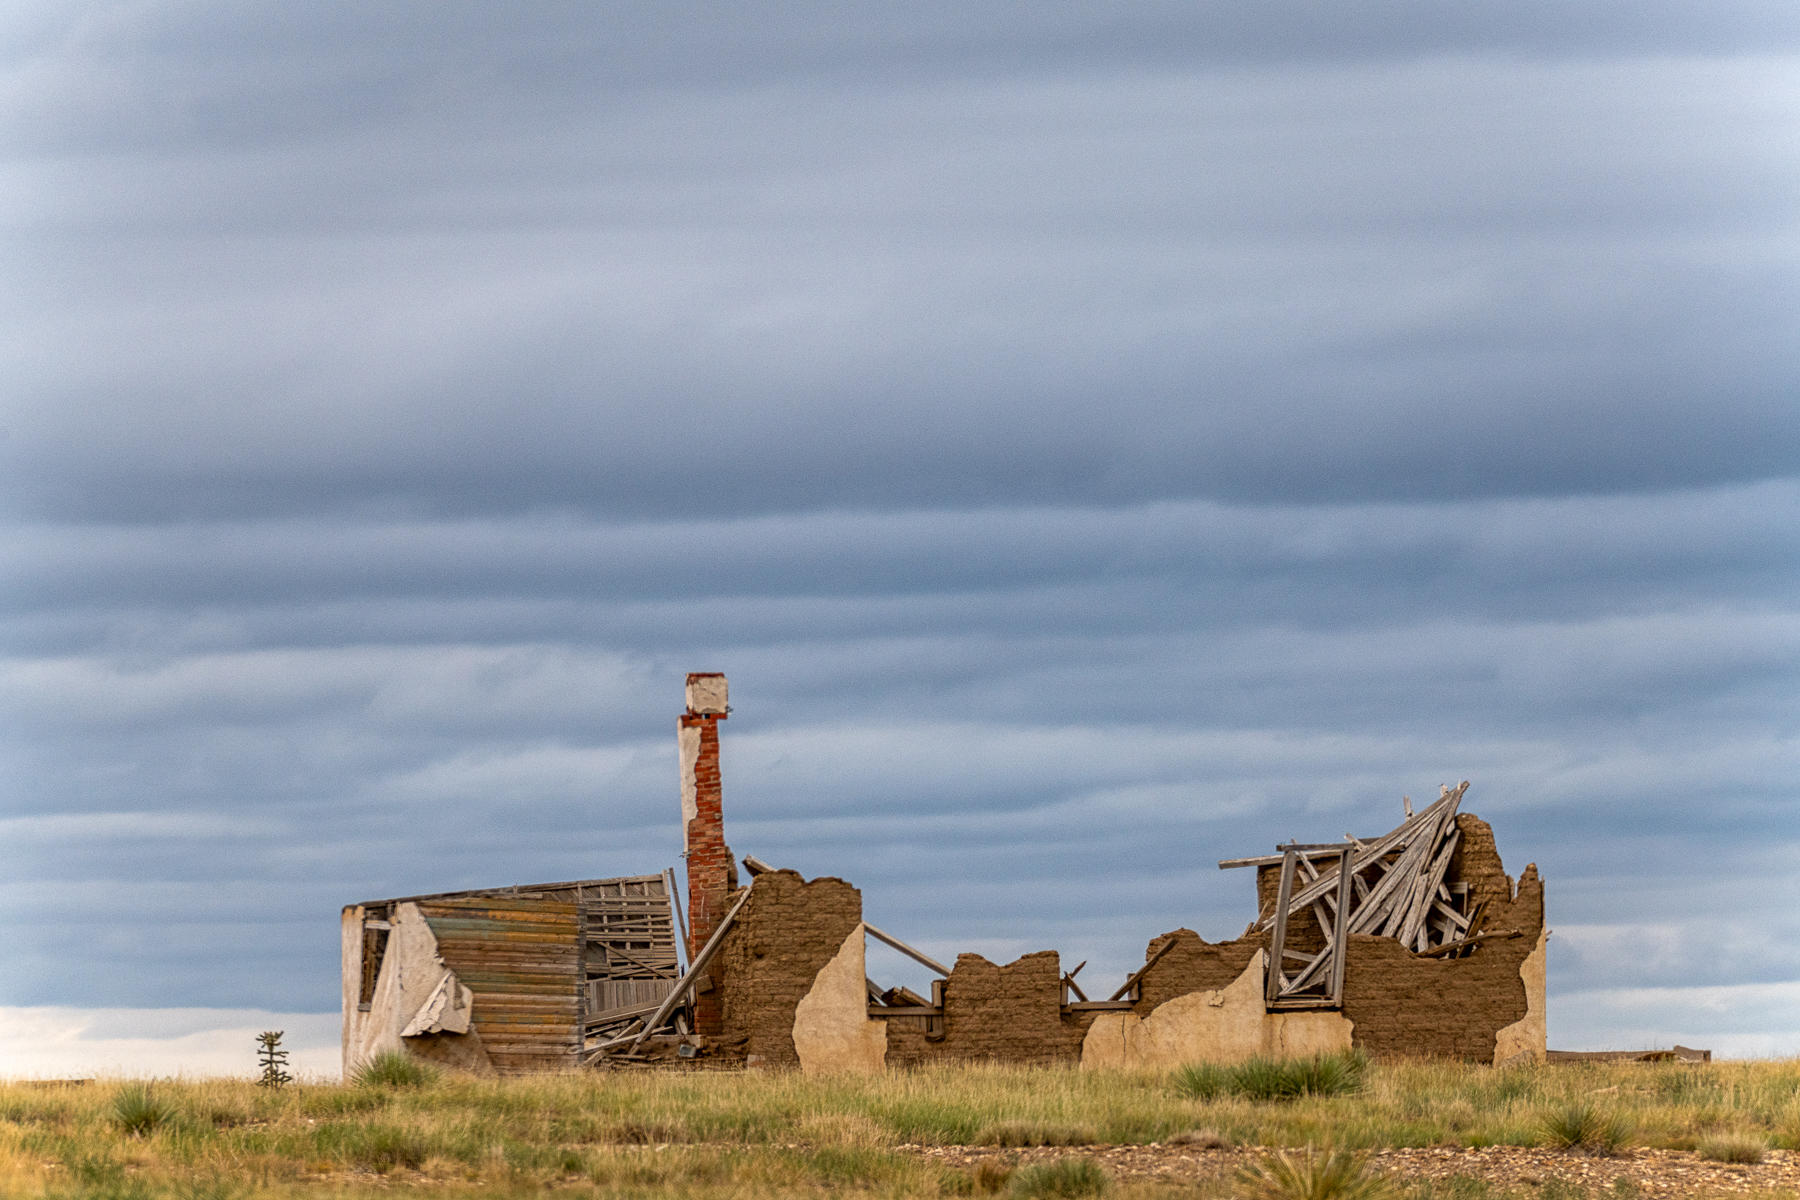 Disintegrated home with chimney still standing. : Small Towns : ELIZABETH SANJUAN PHOTOGRAPHY